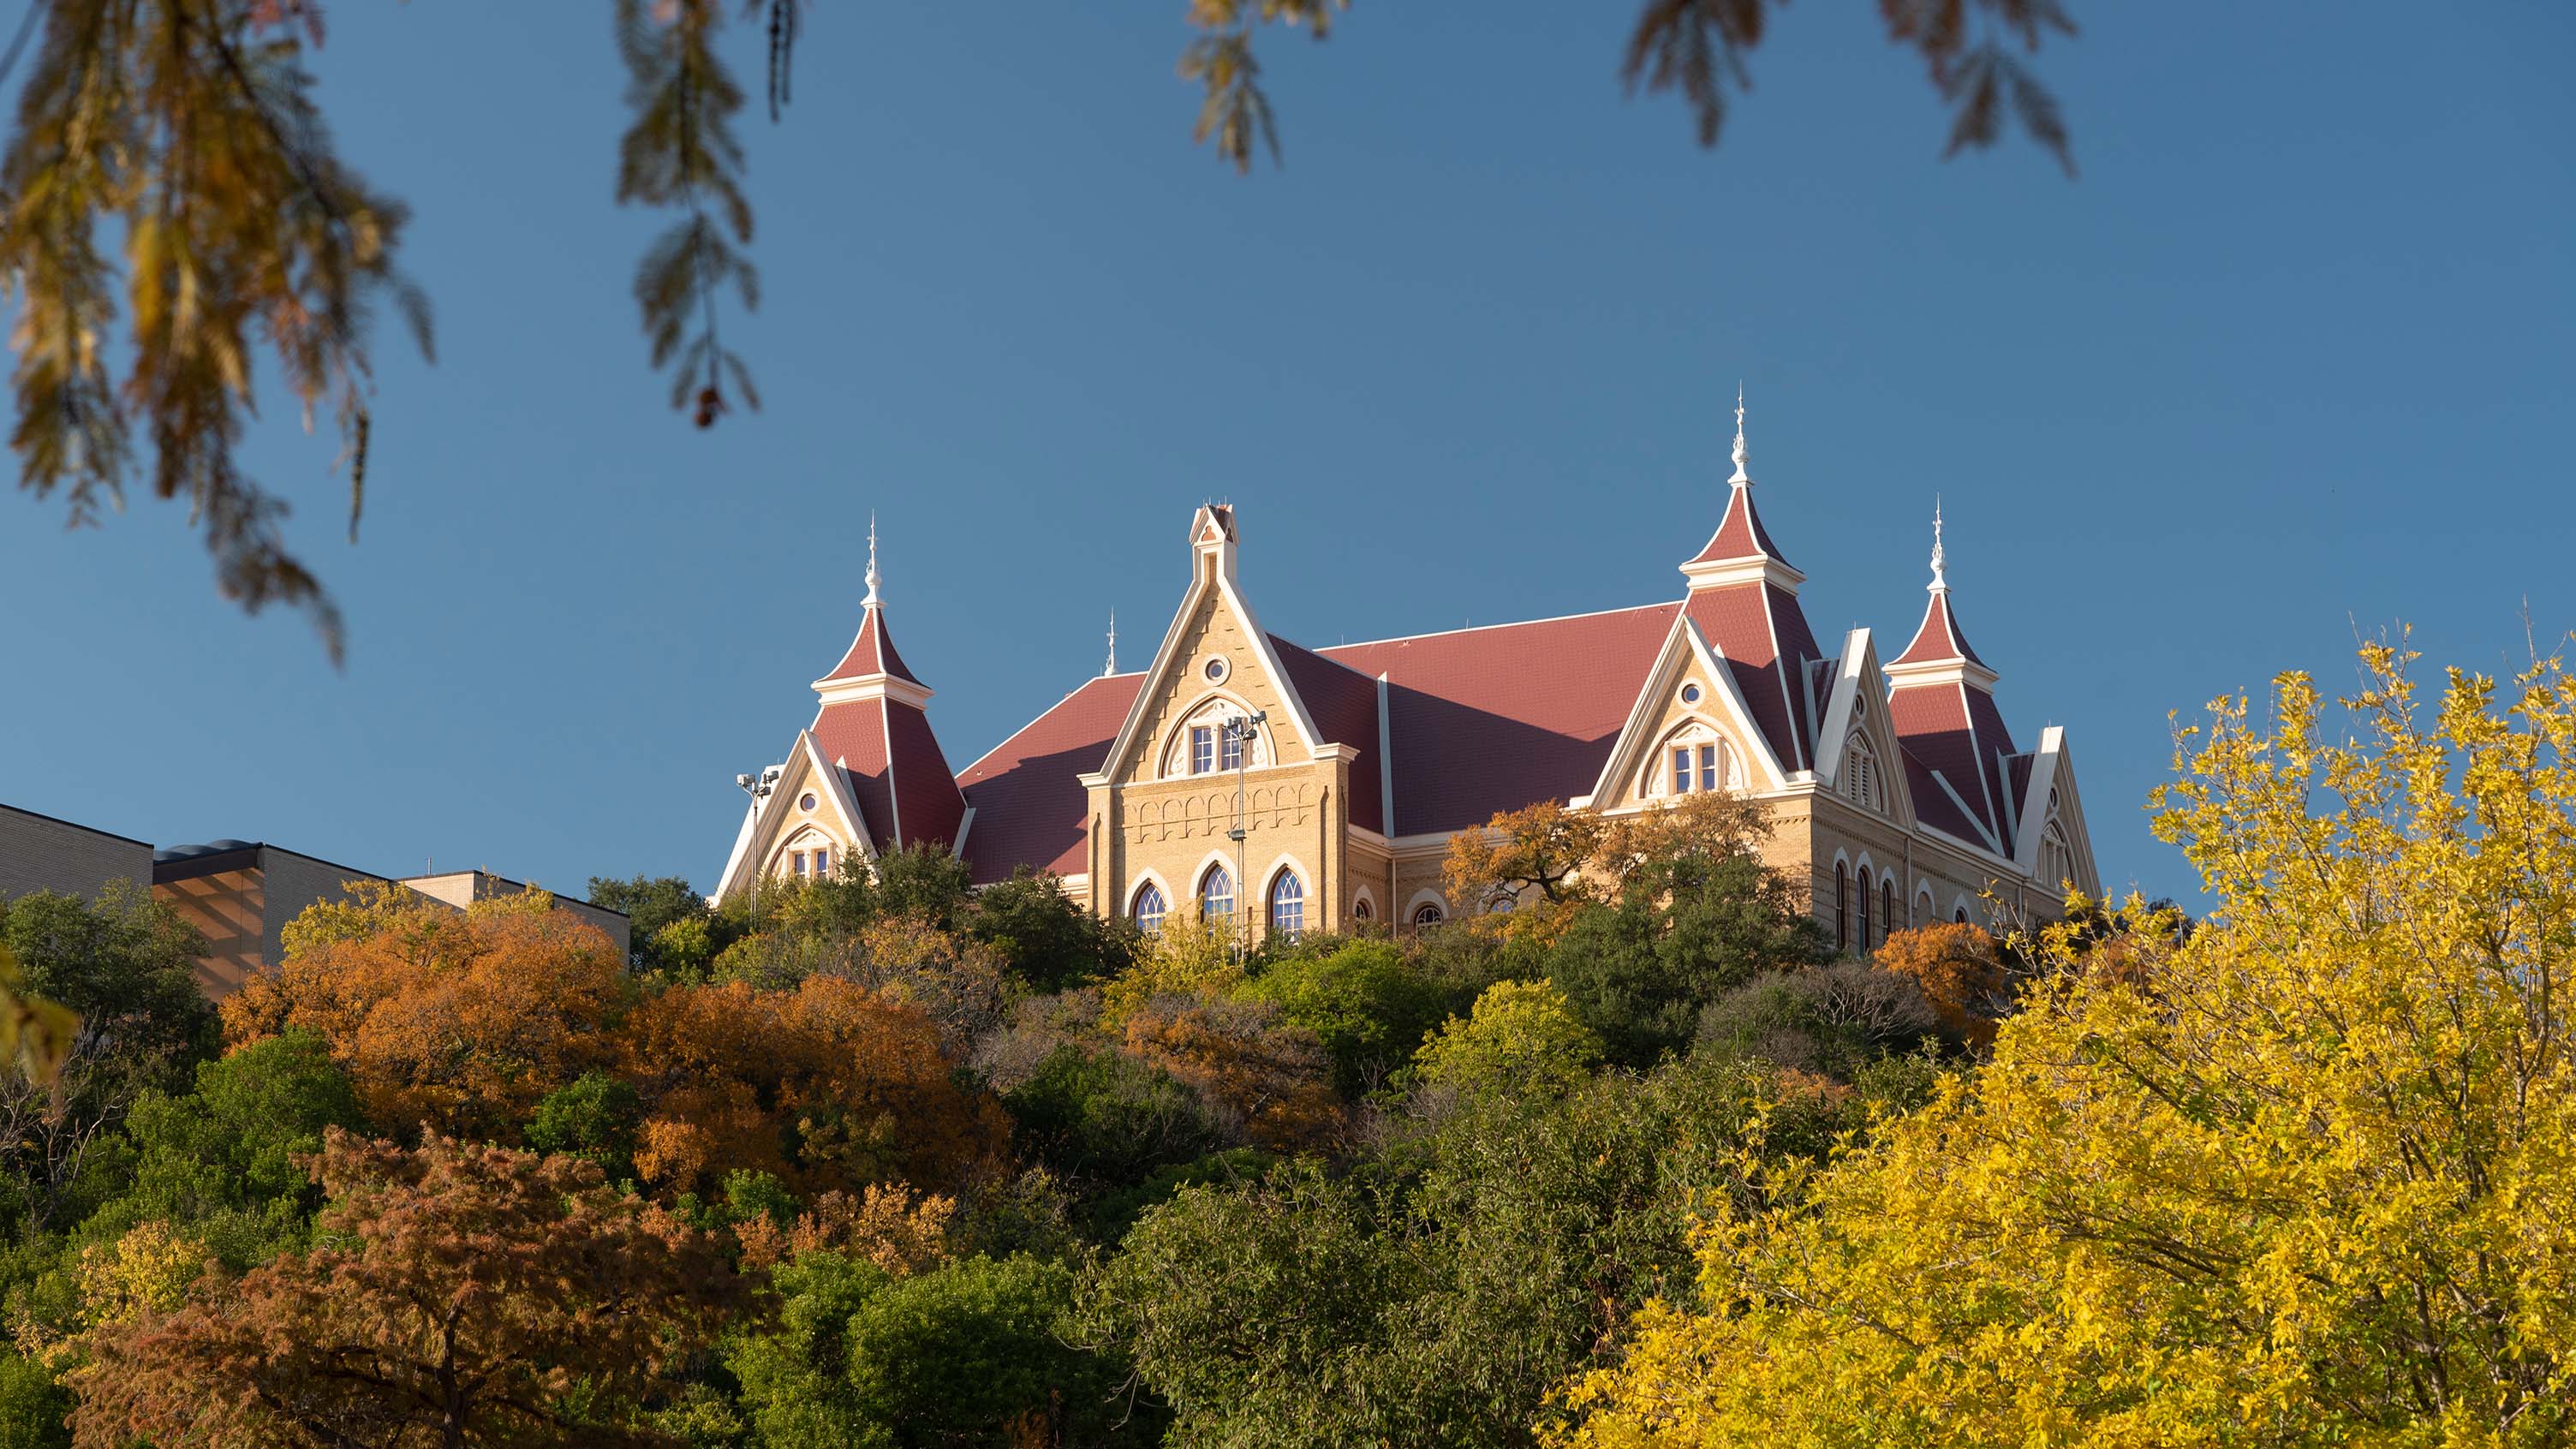 A picture of Old Main.